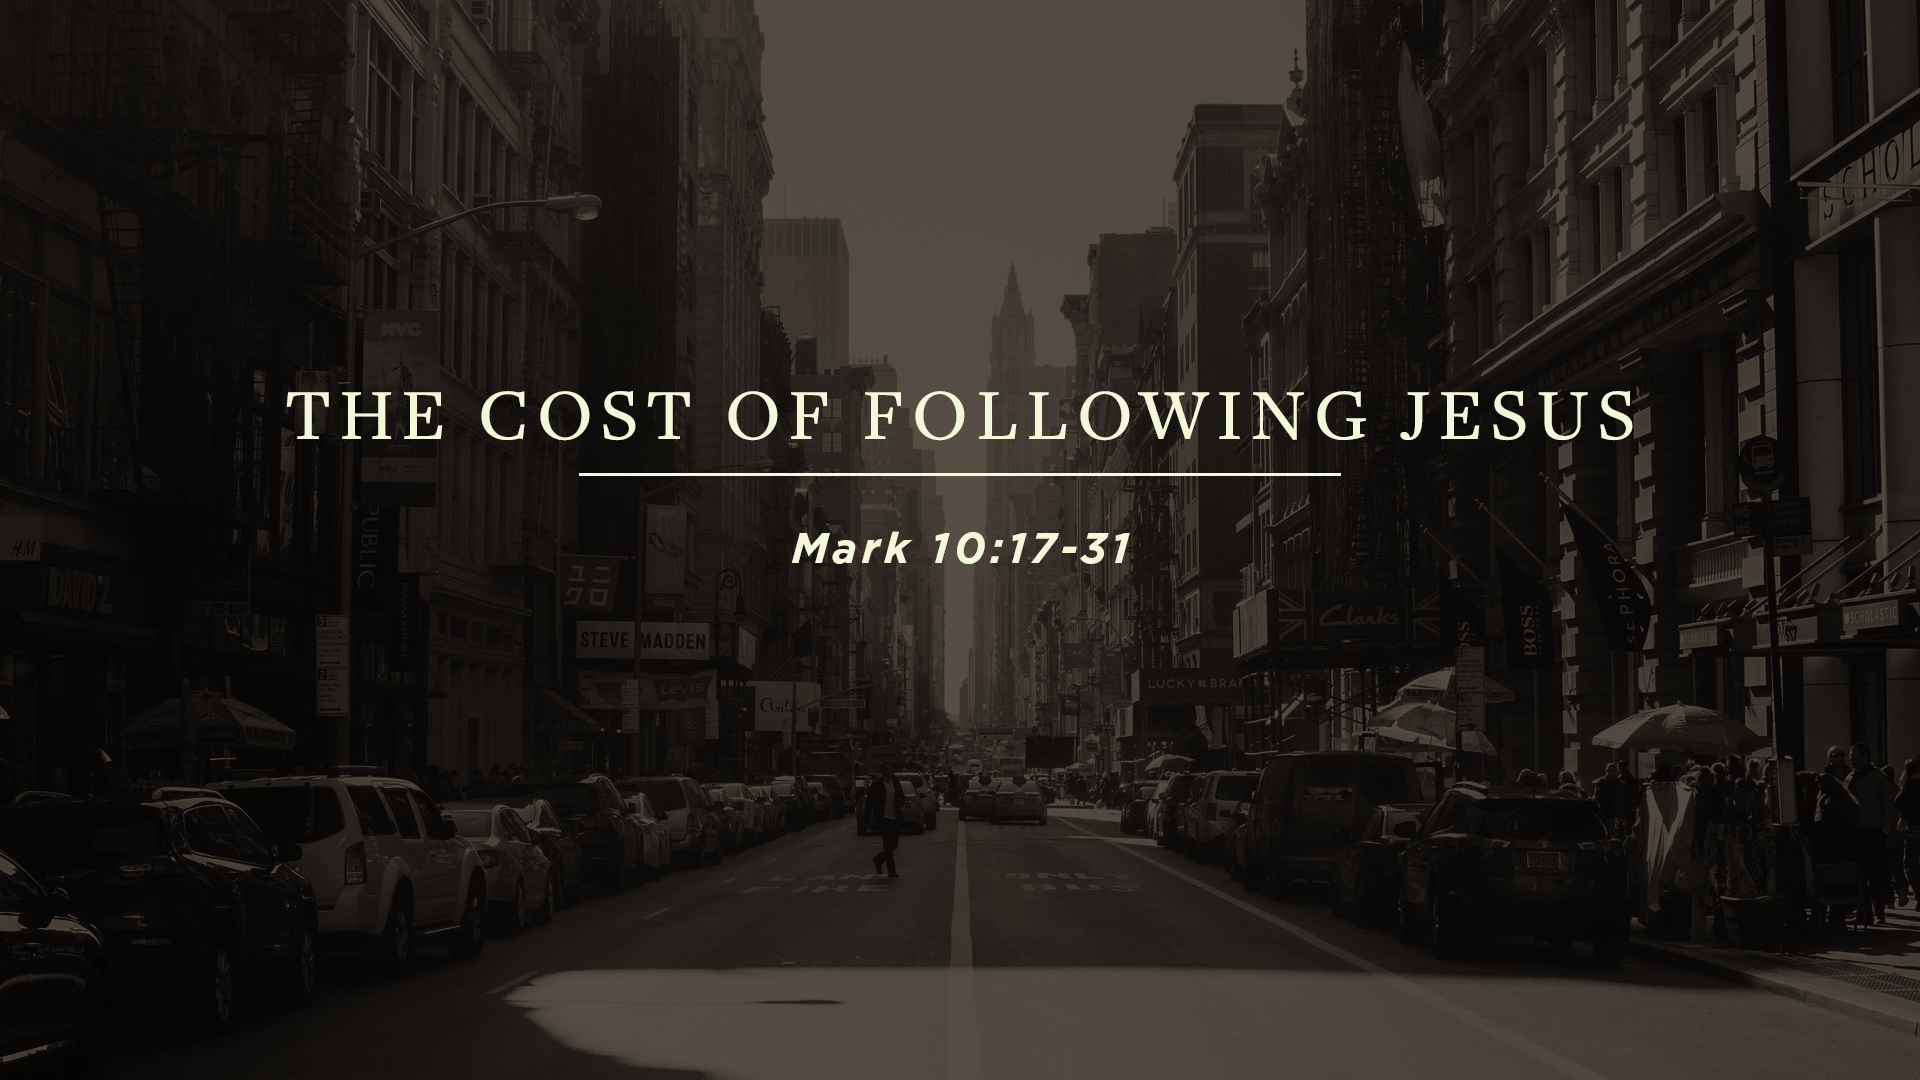 The Cost of Following Jesus